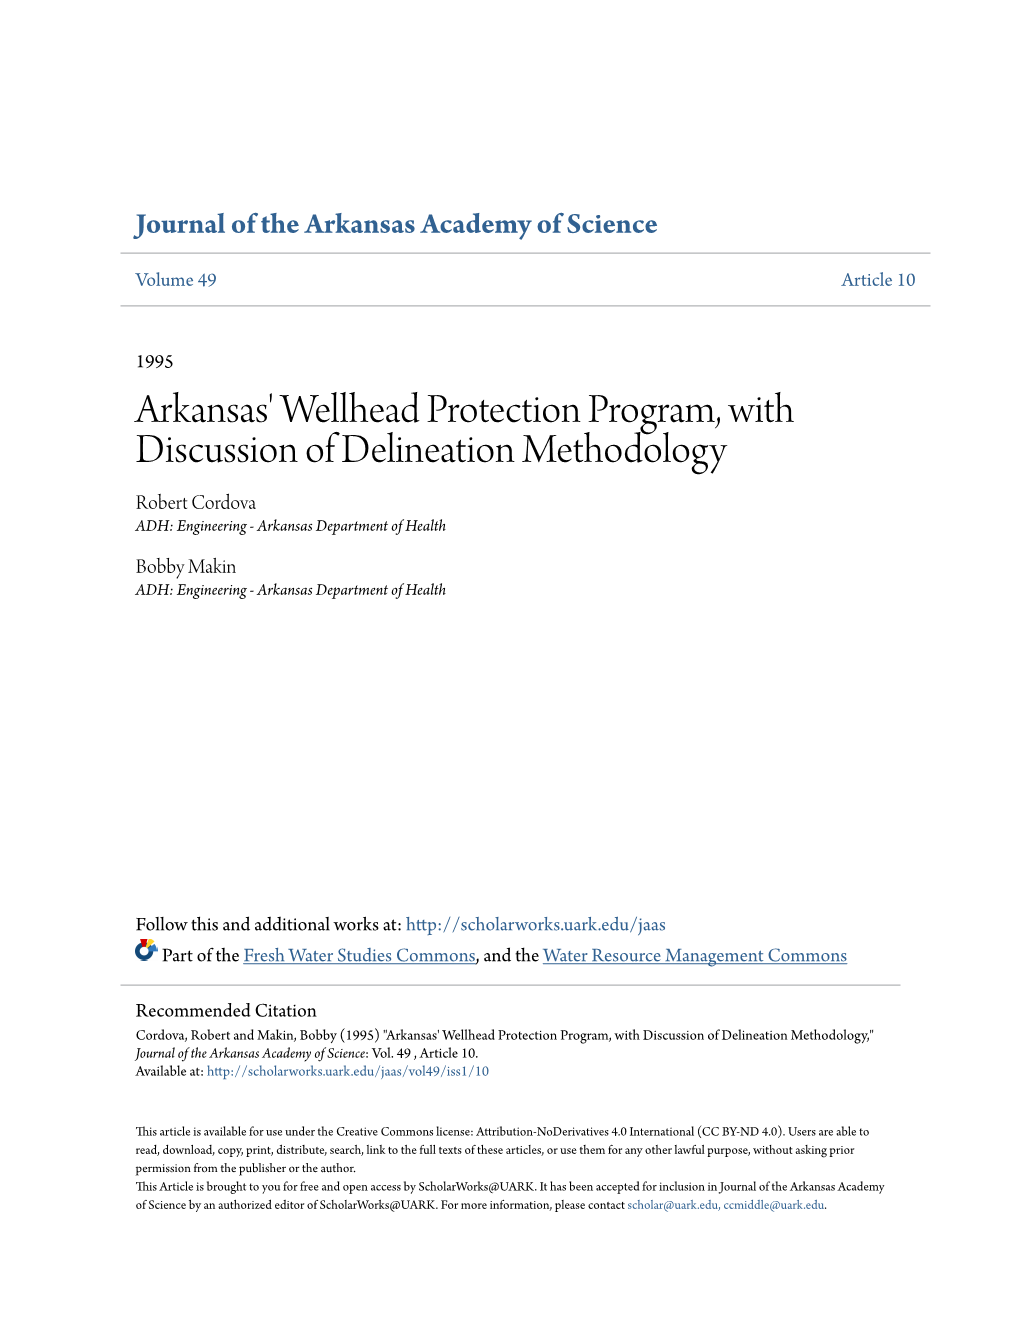 Arkansas' Wellhead Protection Program, with Discussion of Delineation Methodology Robert Cordova ADH: Engineering - Arkansas Department of Health